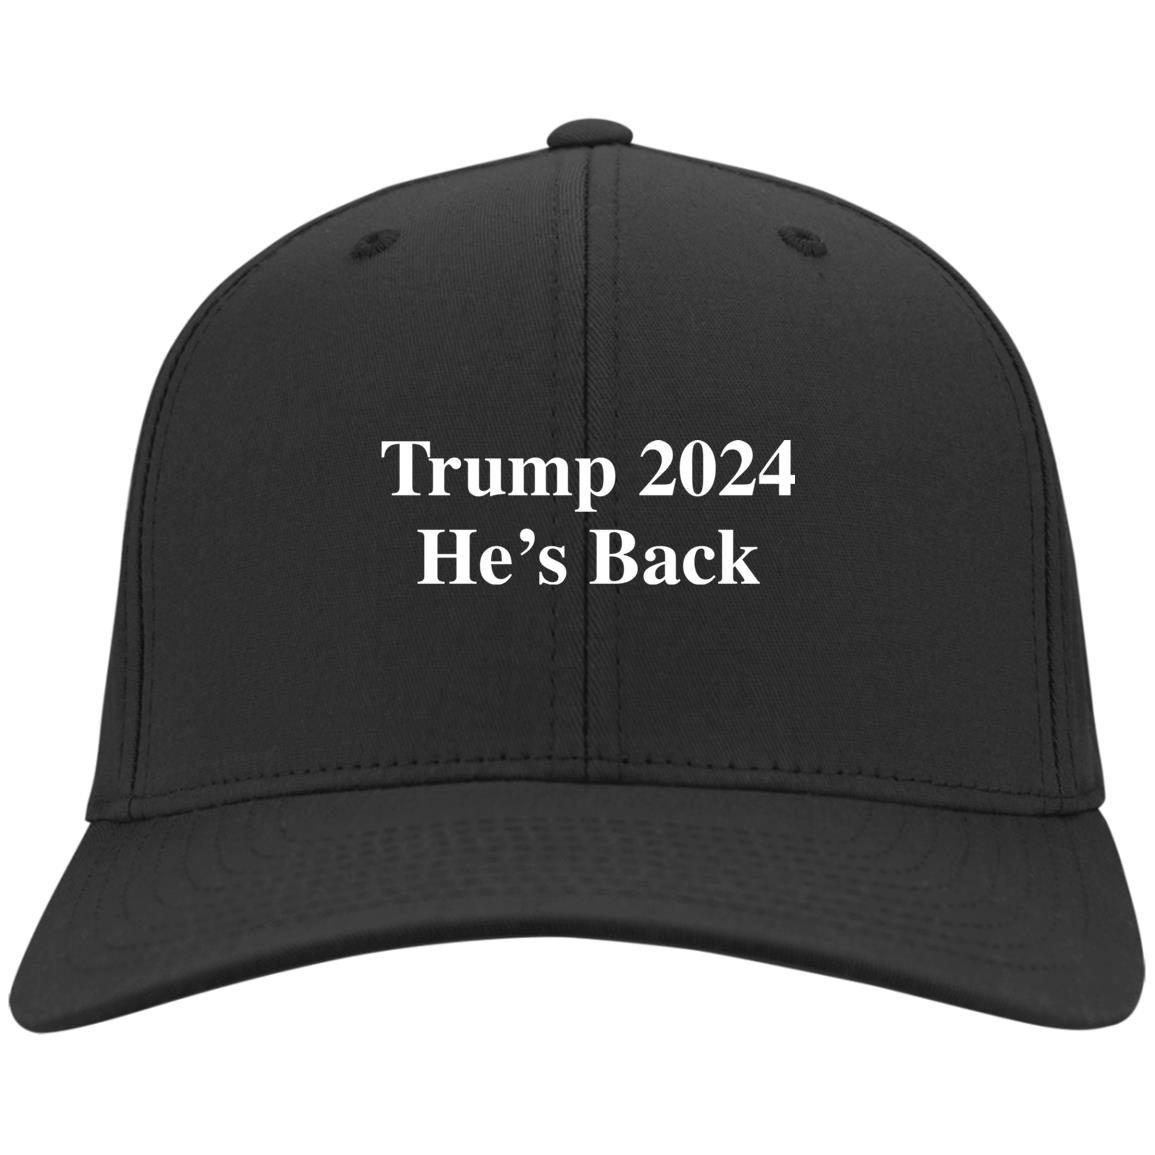 Tr*mp 2024 he is back hat cap